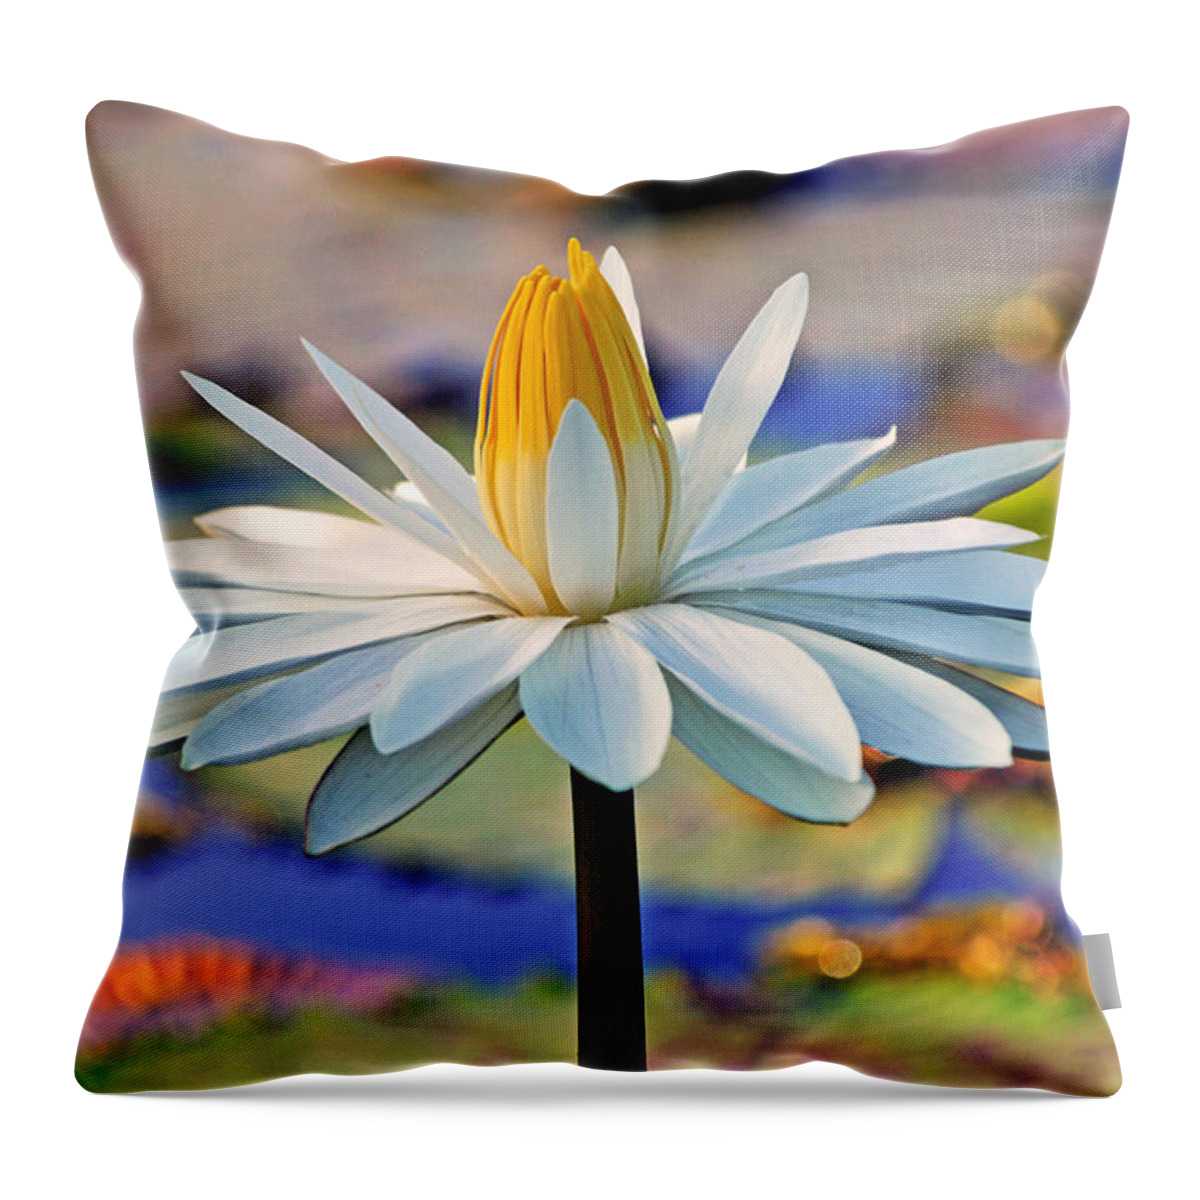 Flower Throw Pillow featuring the photograph Painted by the Sun by Melanie Moraga